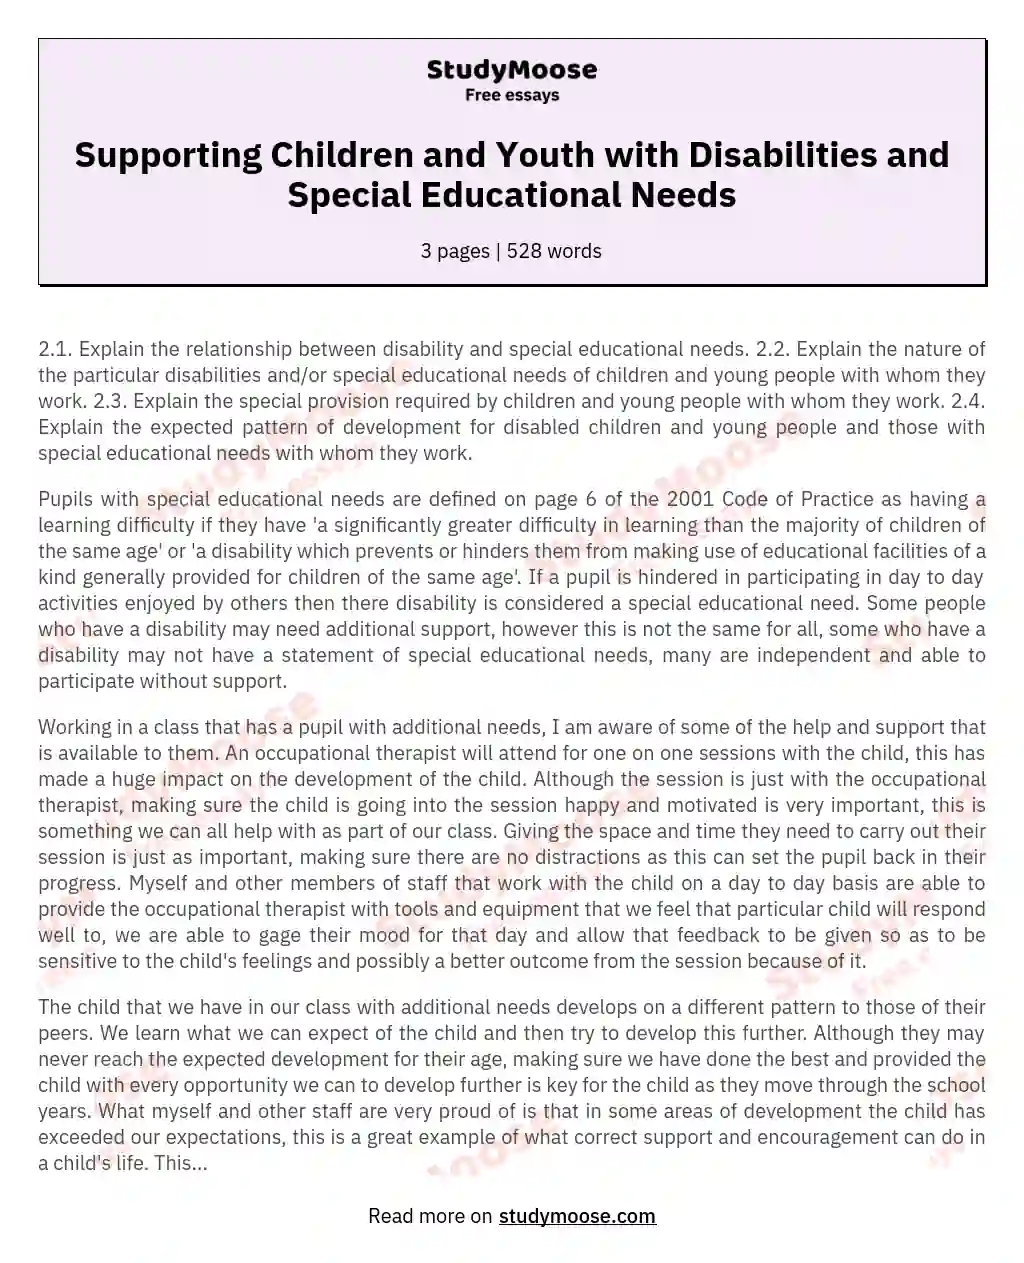 Supporting Children and Youth with Disabilities and Special Educational Needs essay